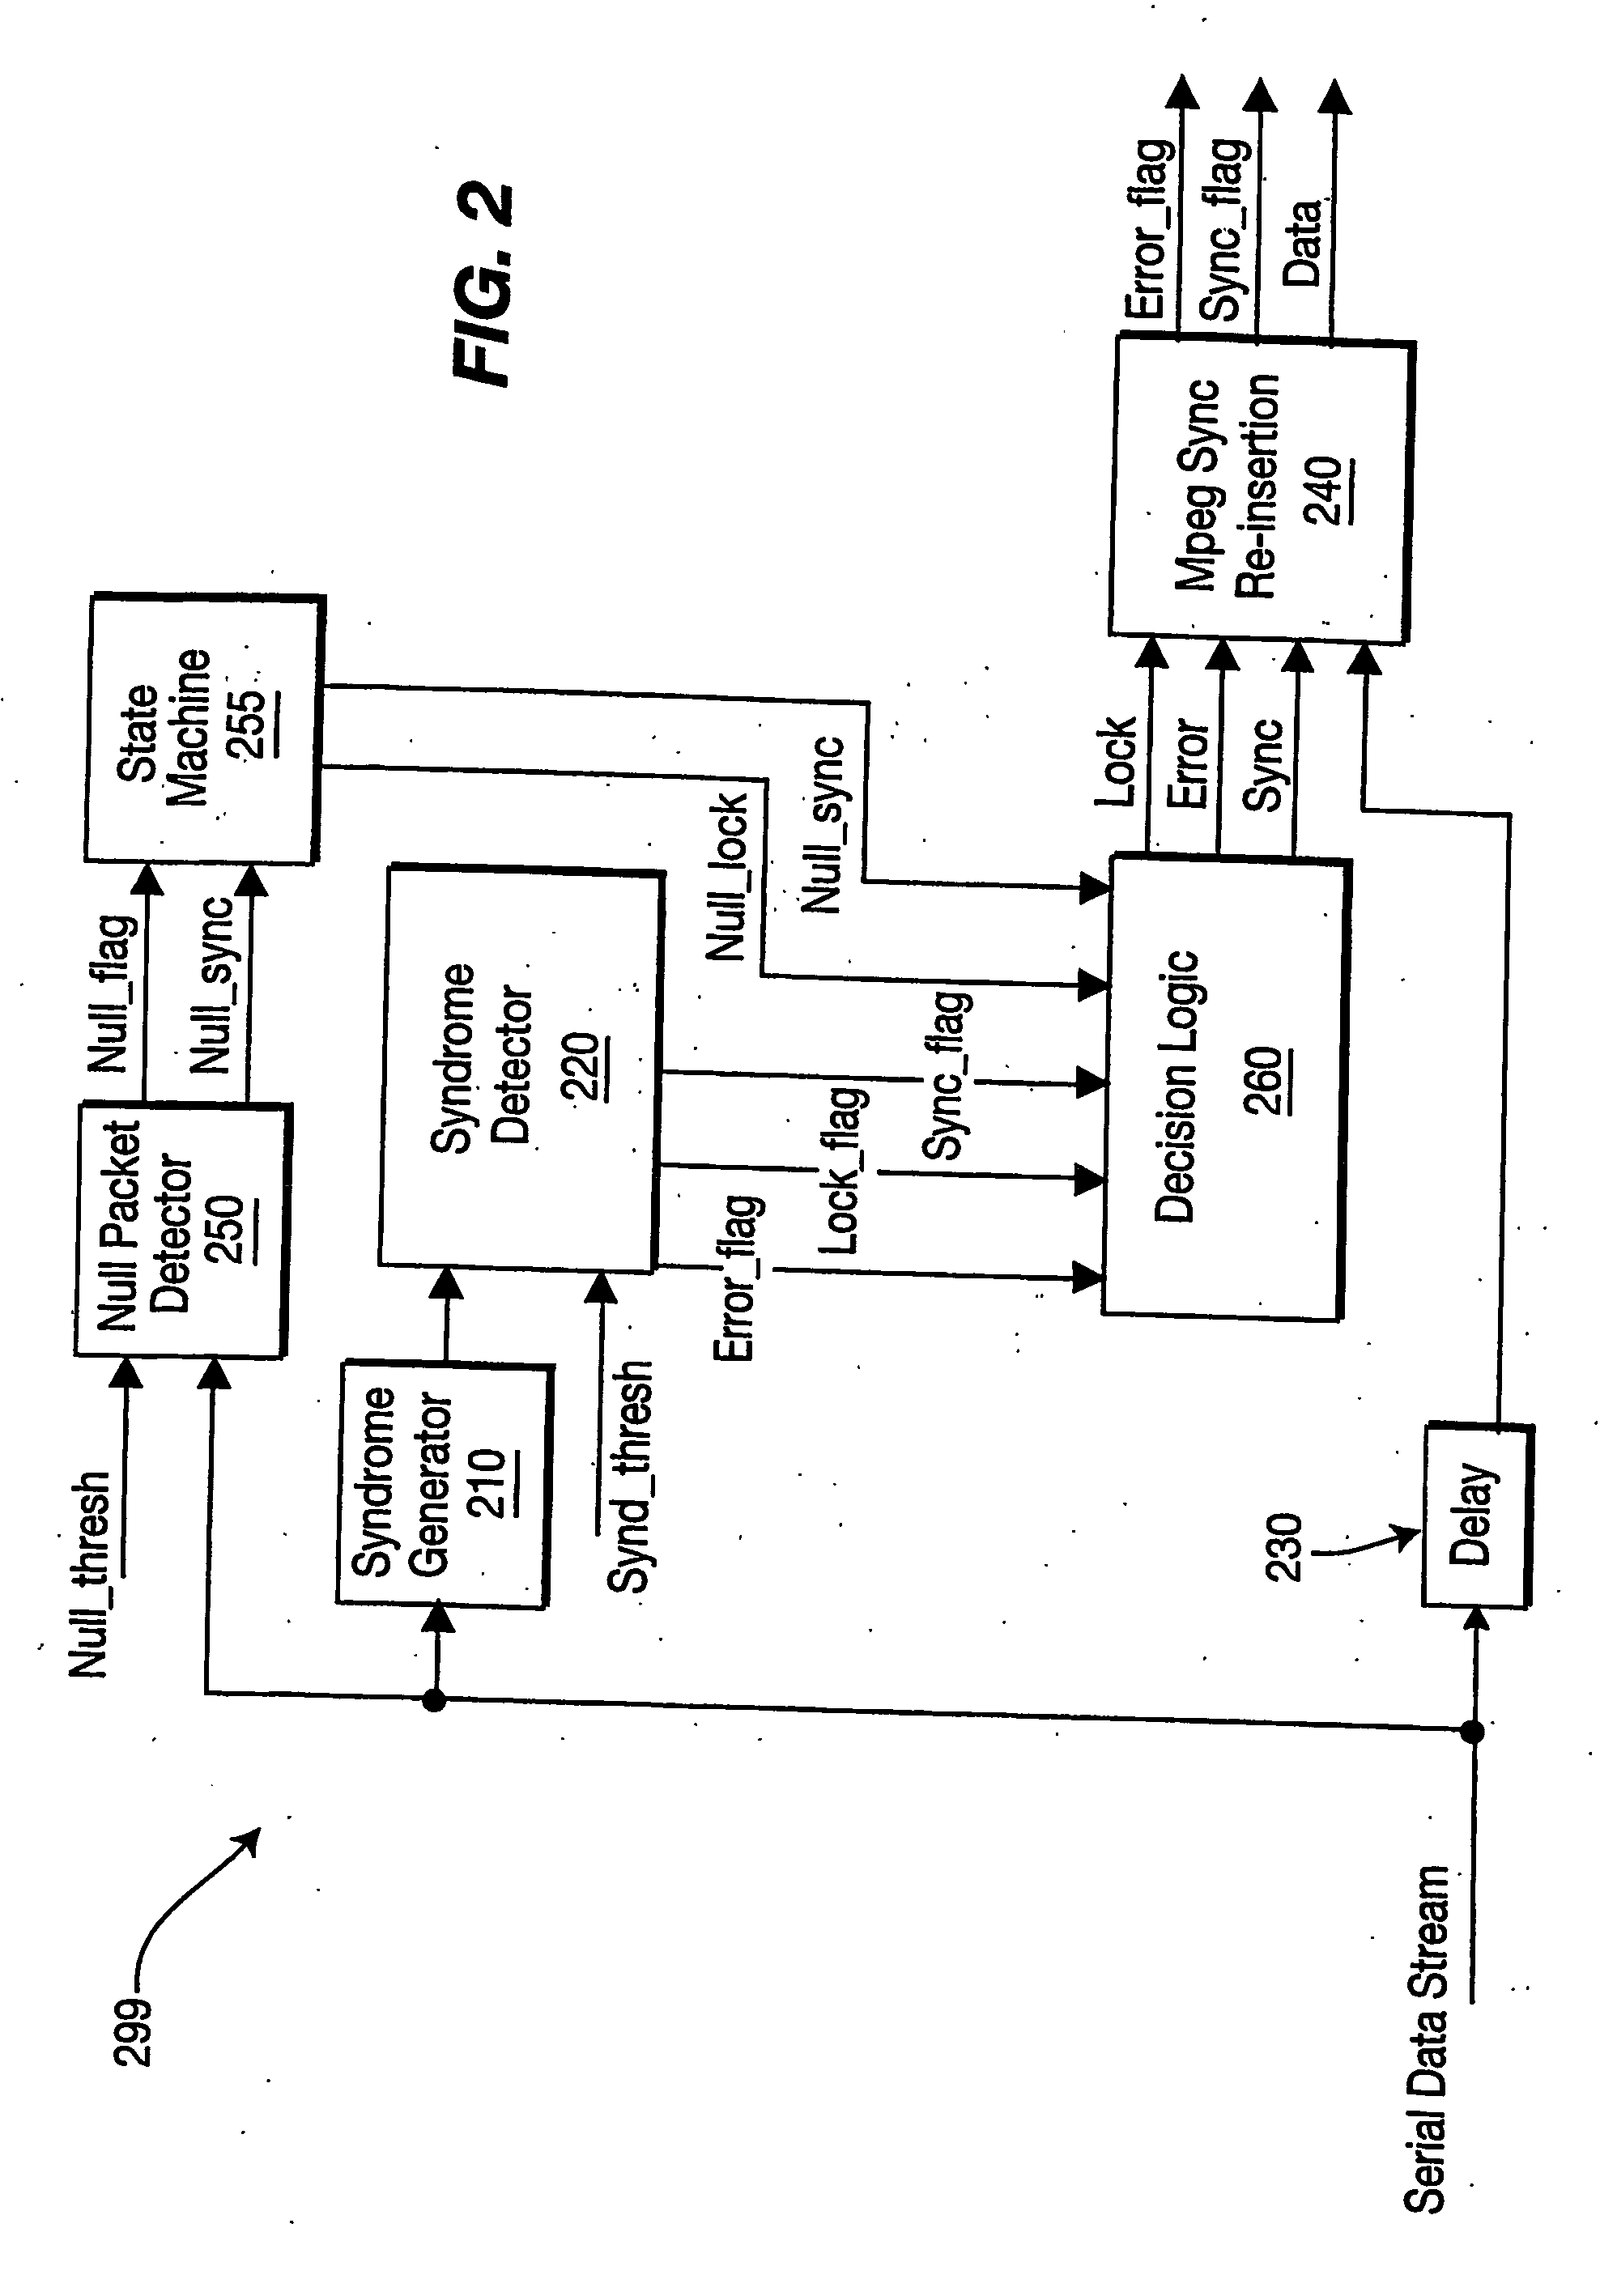 Method and apparatus for processing null packets in a digital media receiver